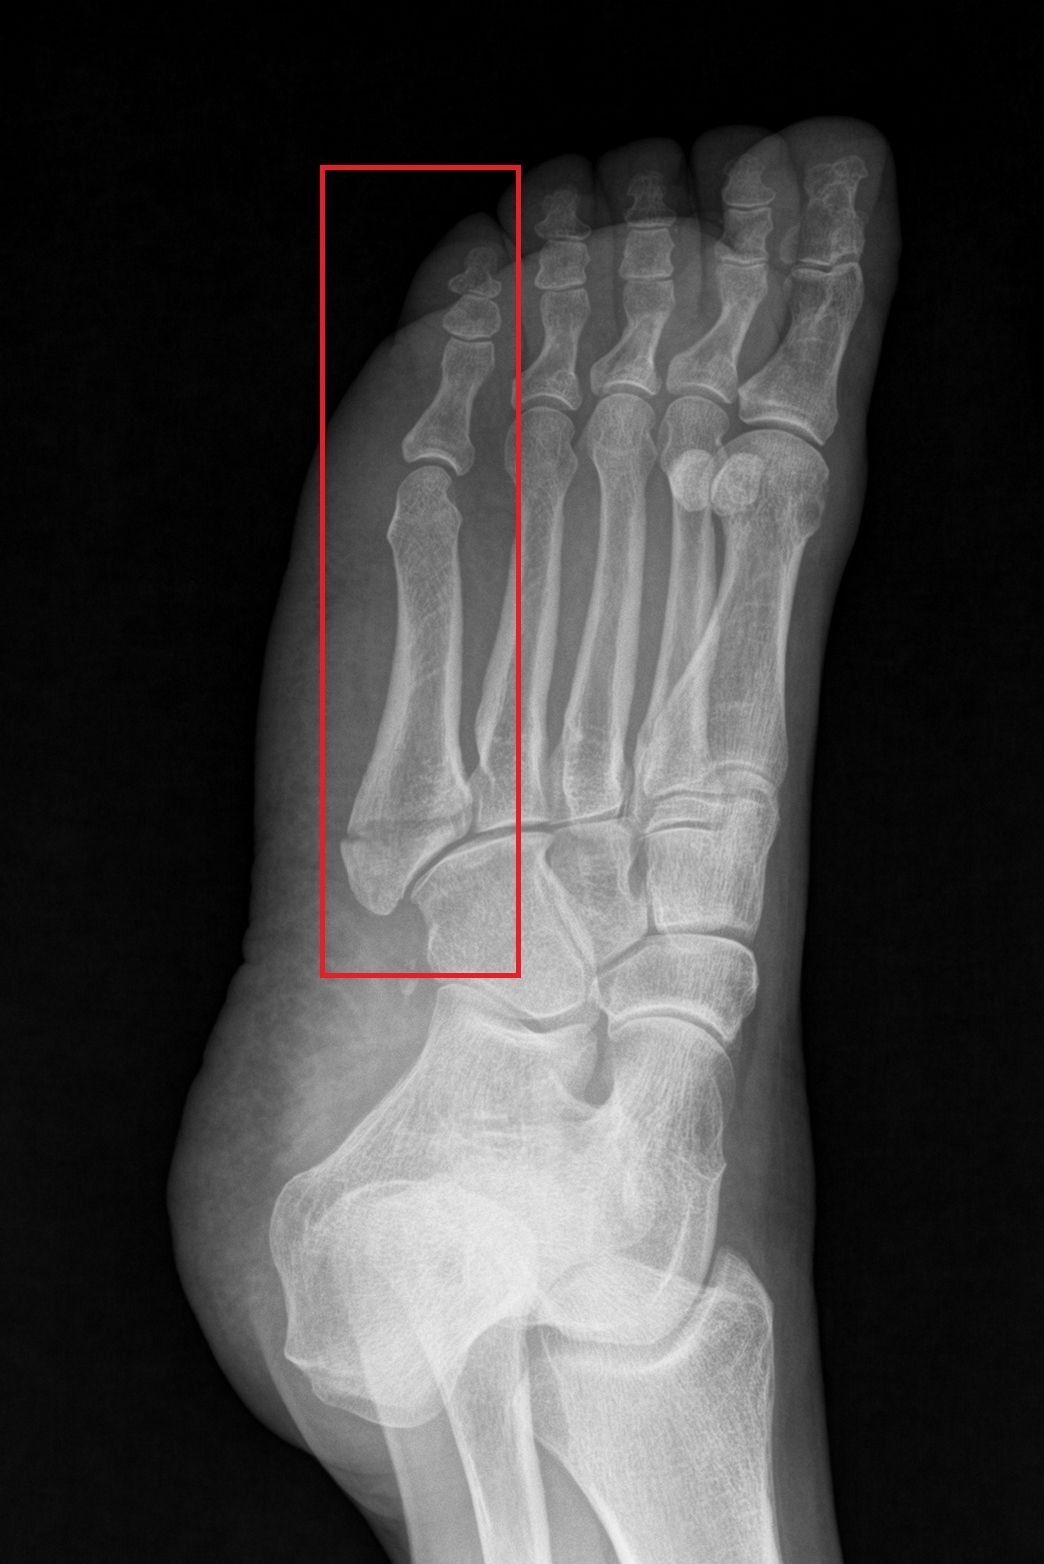 5th Metatarsal Fractures South Jersey Podiatrist South Jersey Foot